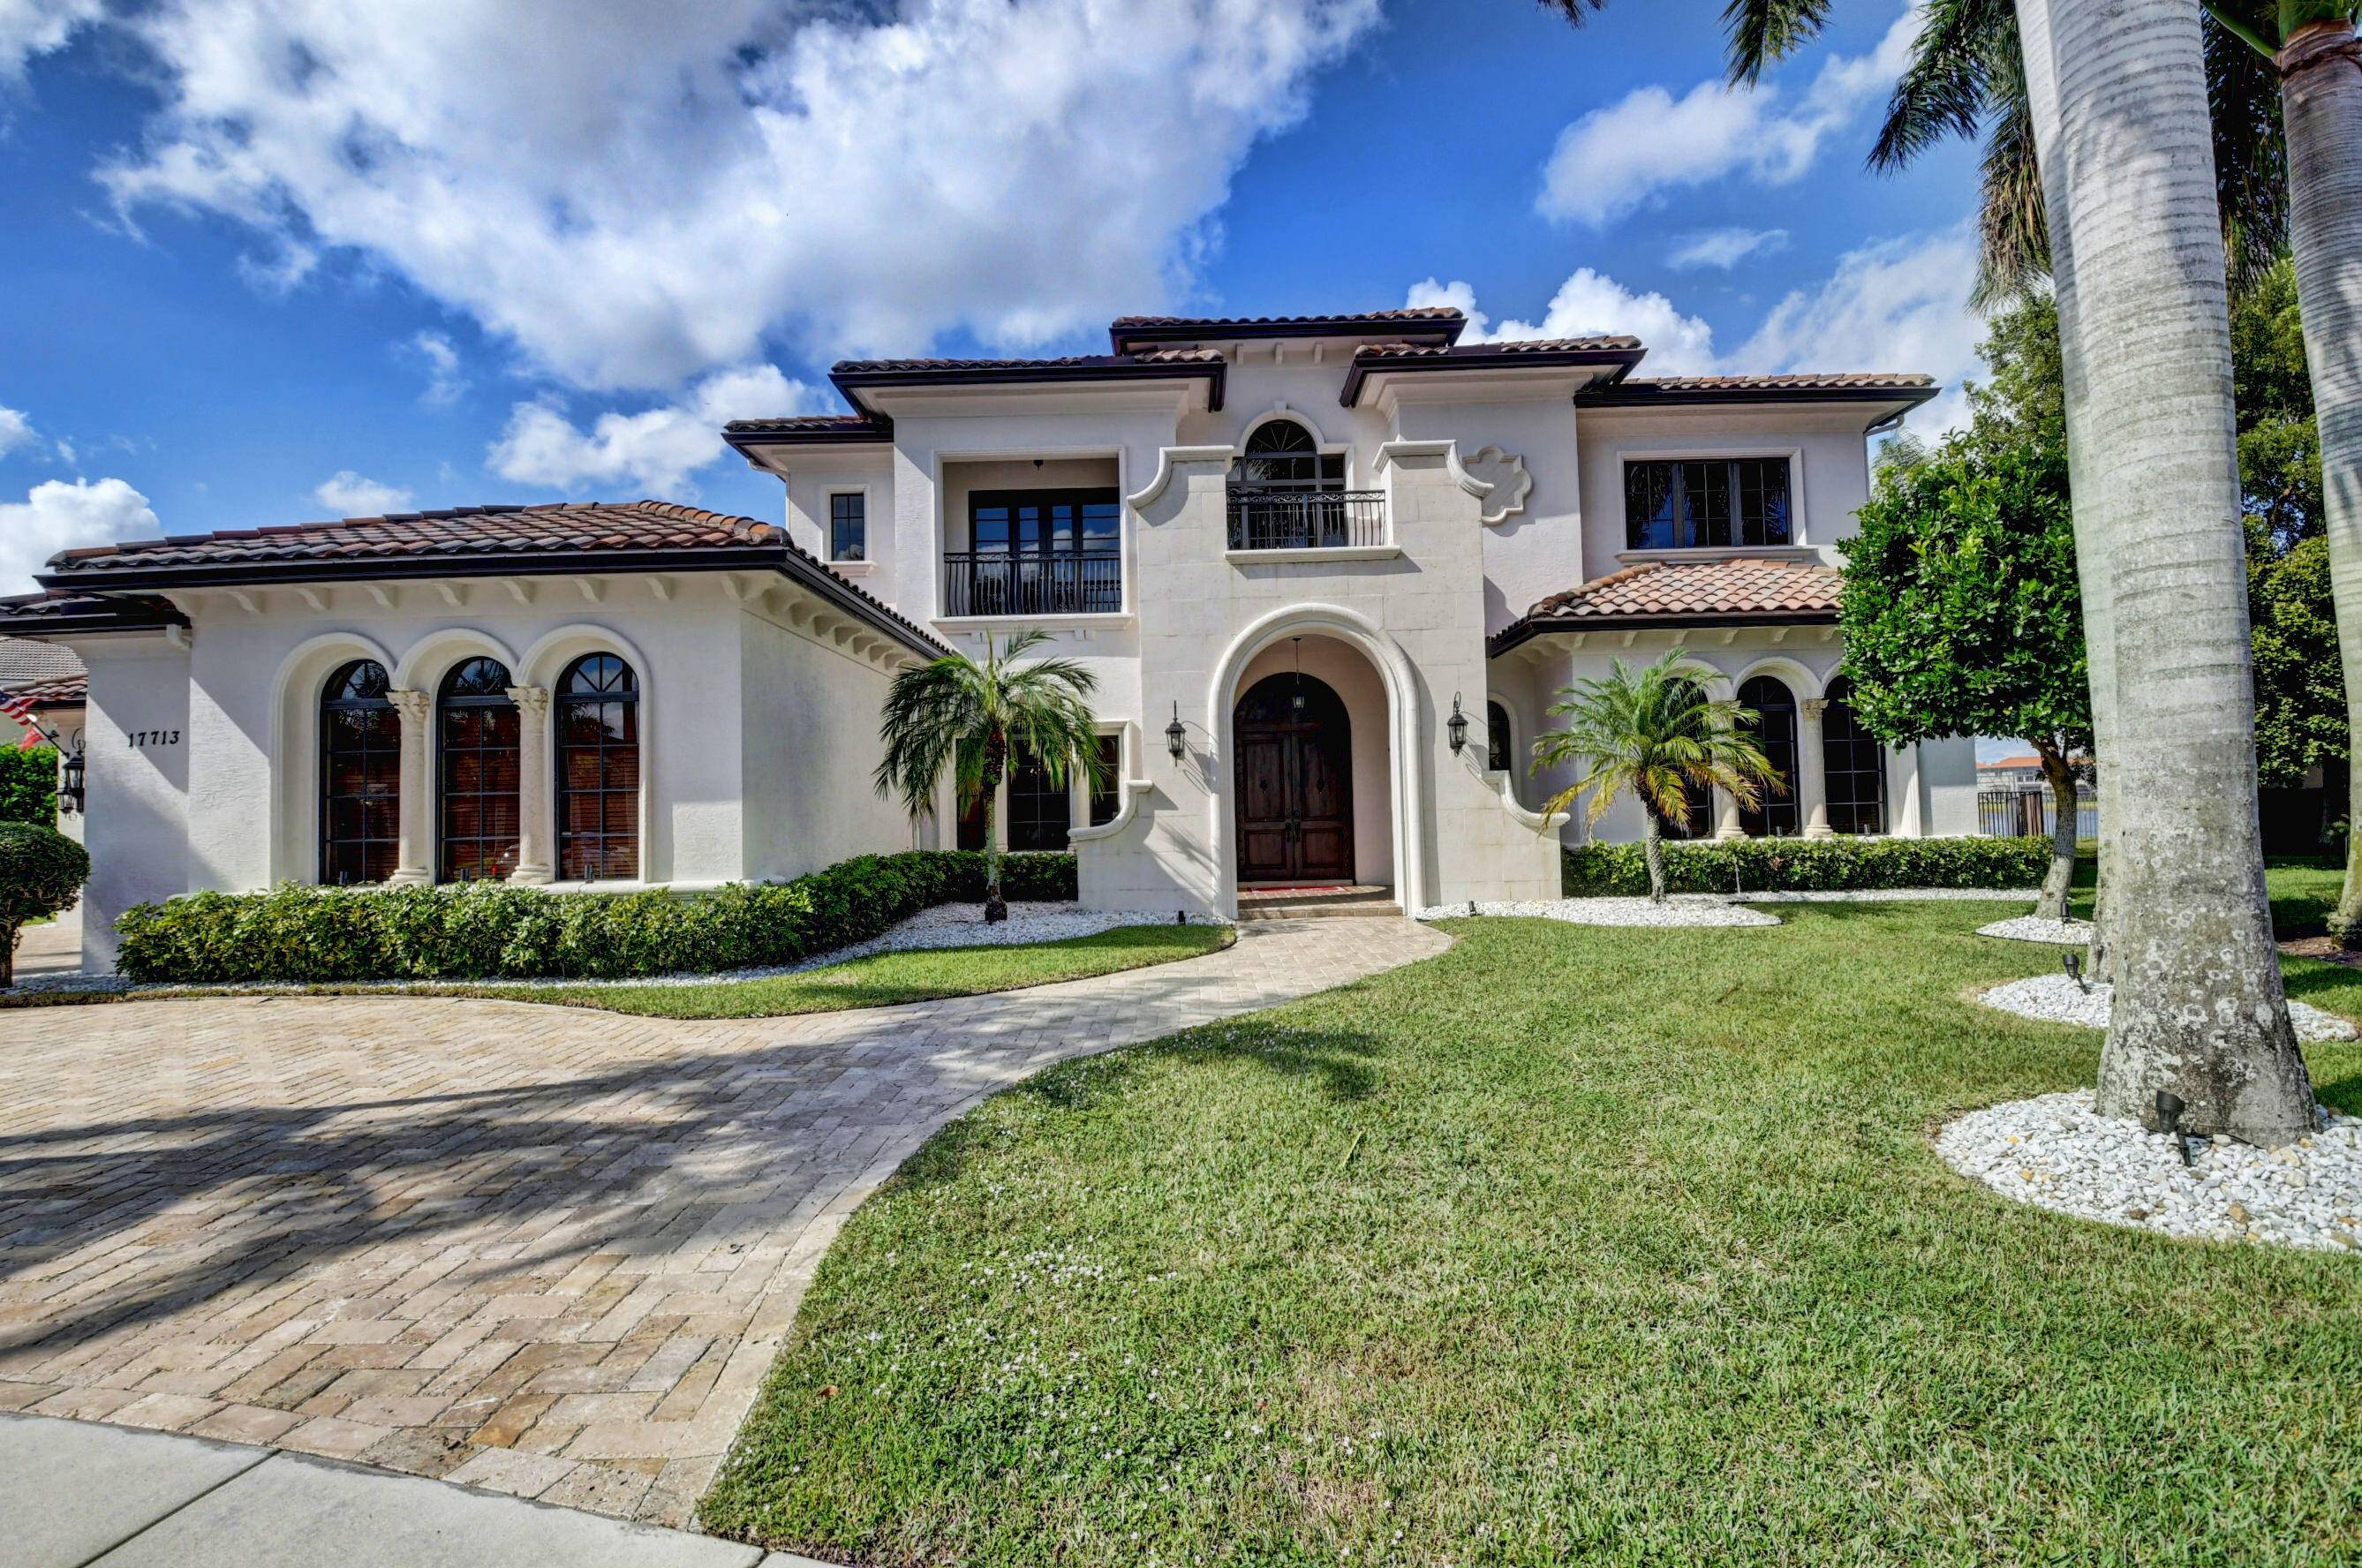 AMAZING OPPORTUNITY TO RENT ONE OF THE LARGEST LAKE FRONT CUSTOM ESTATE HOMES IN THE OAKS.